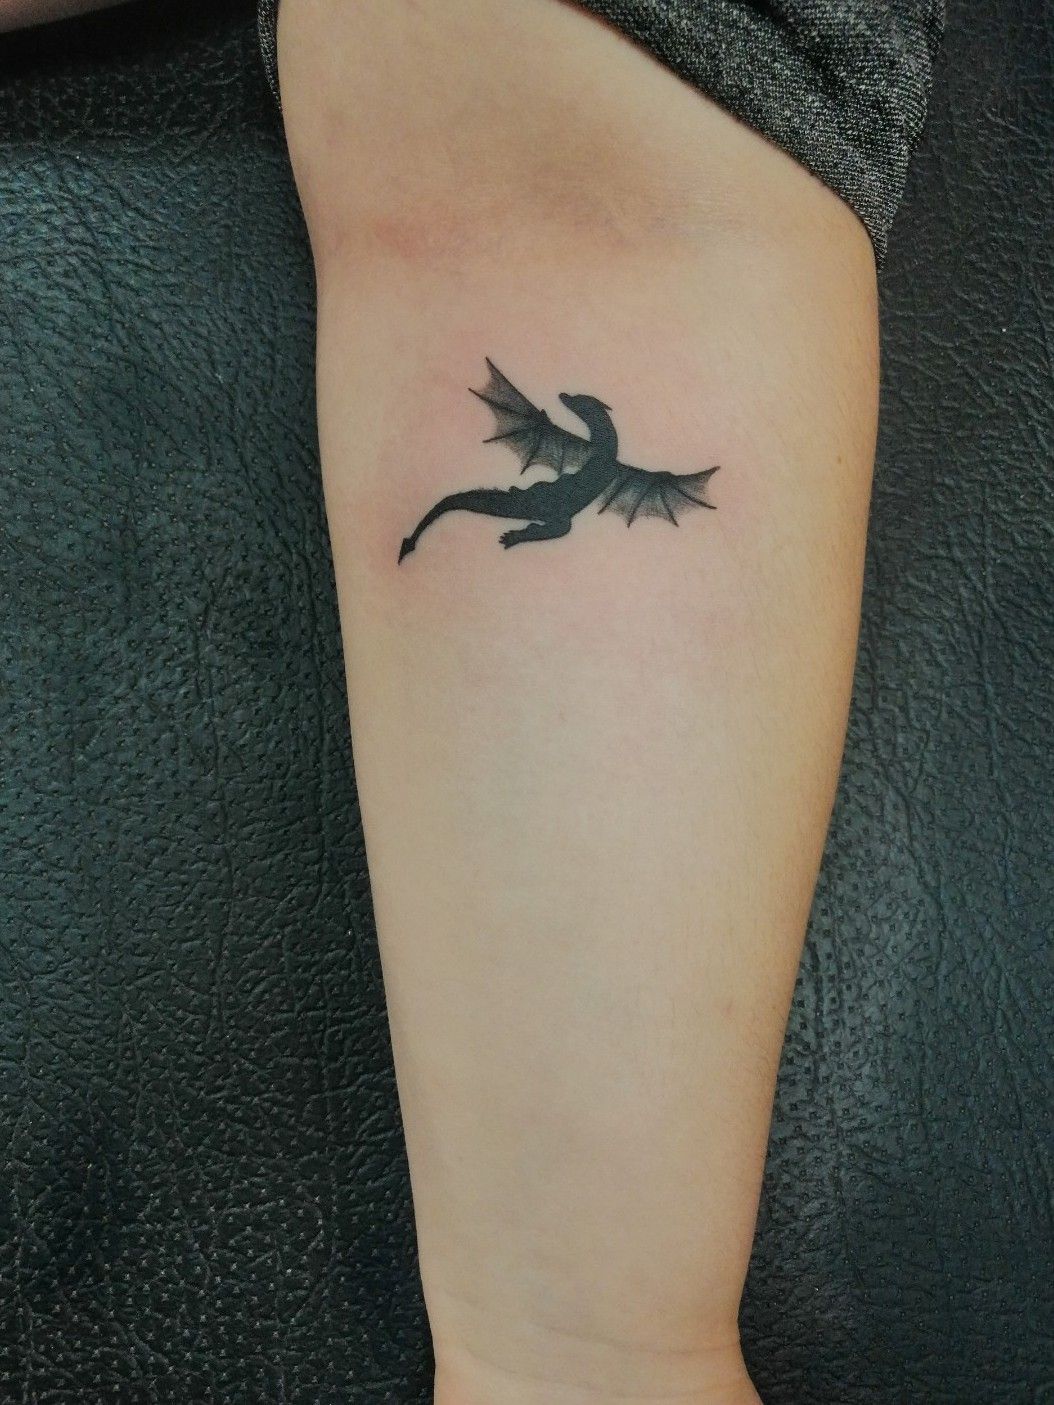 Little dragon tattoo made by jimmycreep nctattooers 1207 stippling  dragontattoo  Instagram